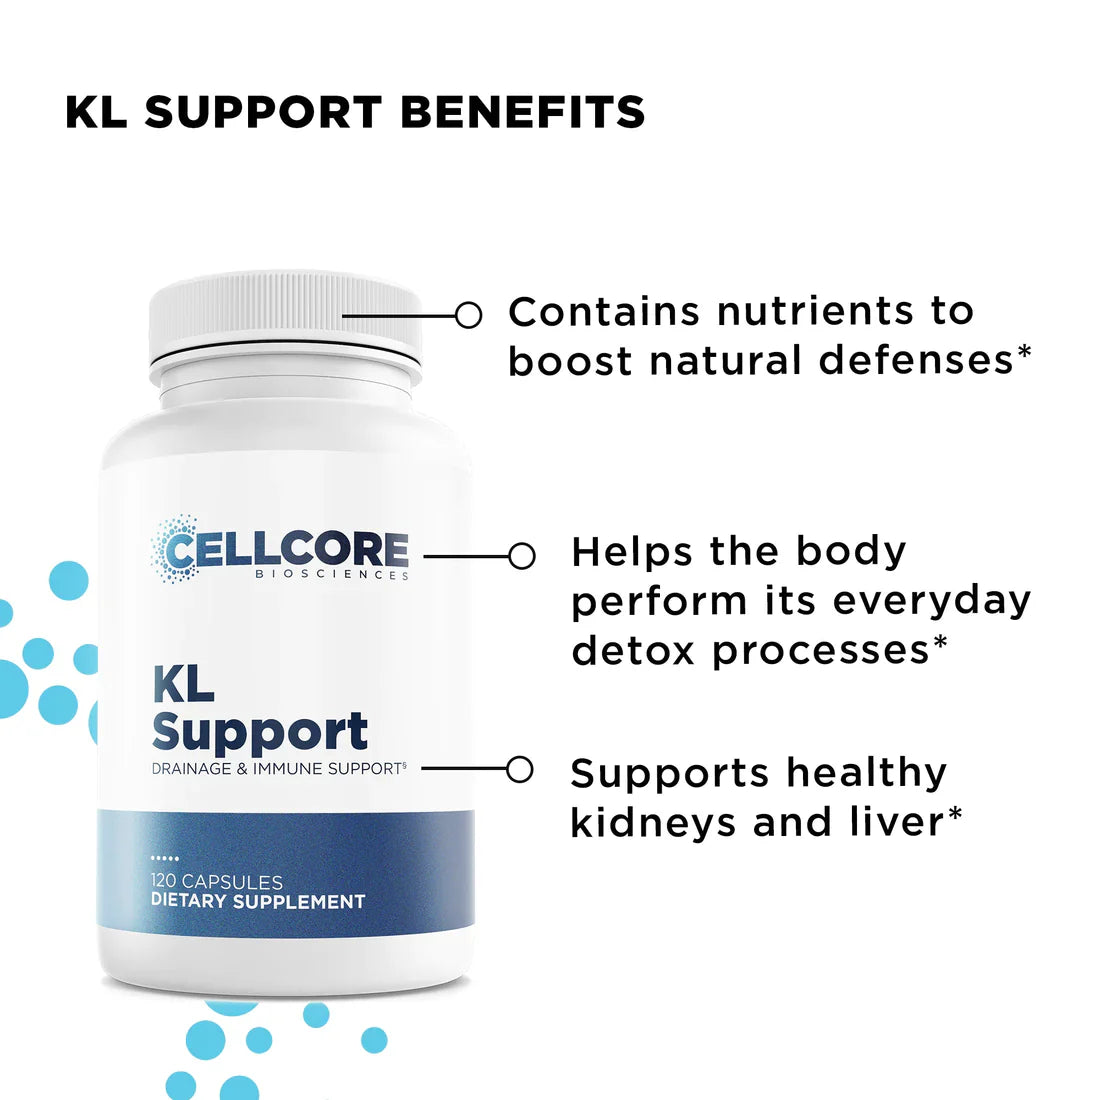 KL Support Benefits Phase 1 Cellcore Comprehensive Protocol TRS Detox